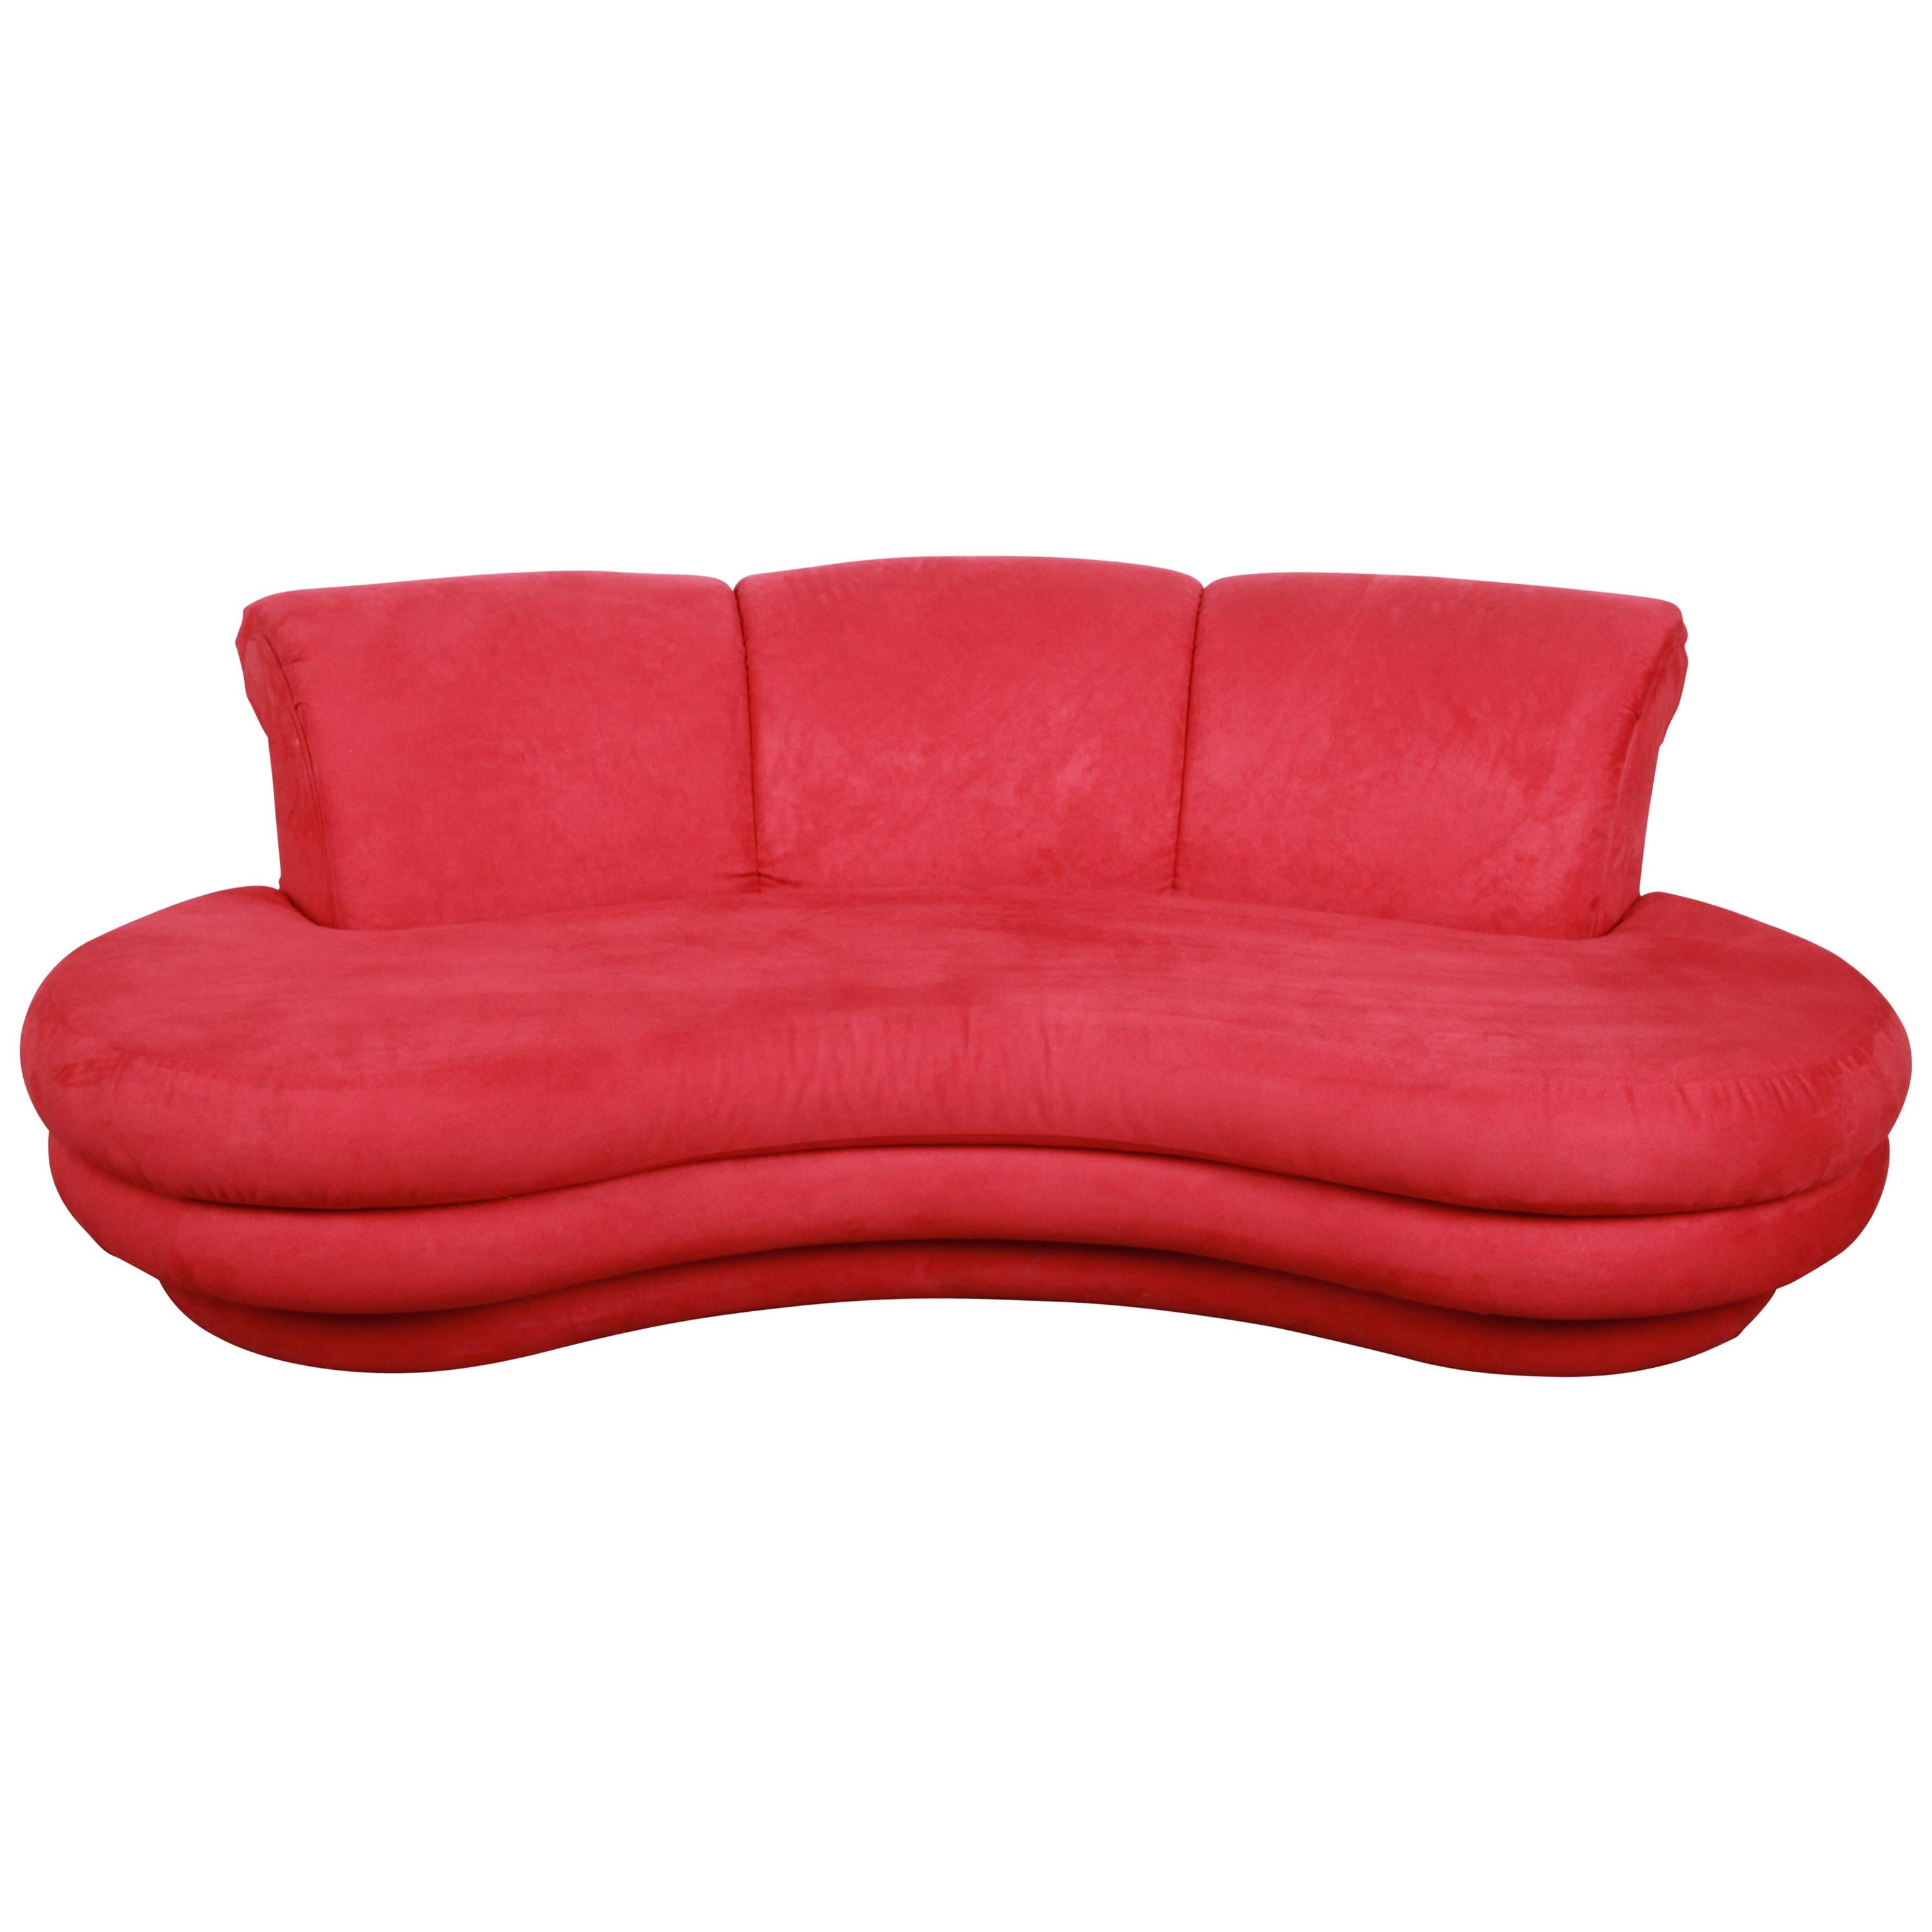 Adrian Pearsall Curved Kidney Shape Sofa for Comfort Designs